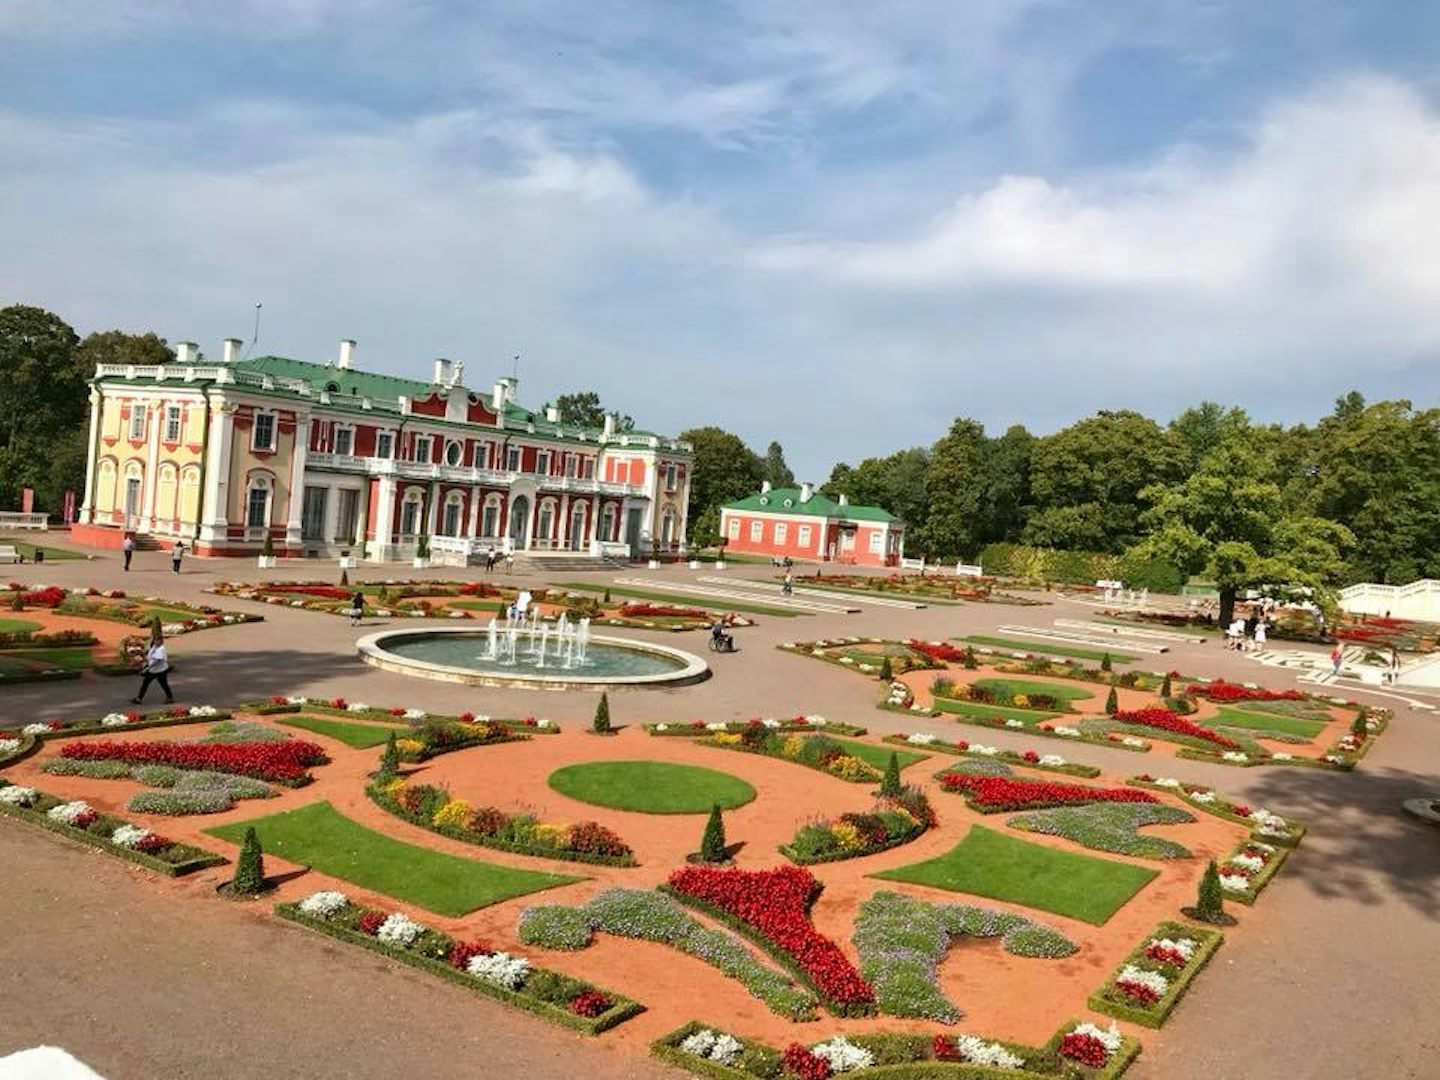 Peter's and Catherine's palace and garden in Tallinn, Estonia